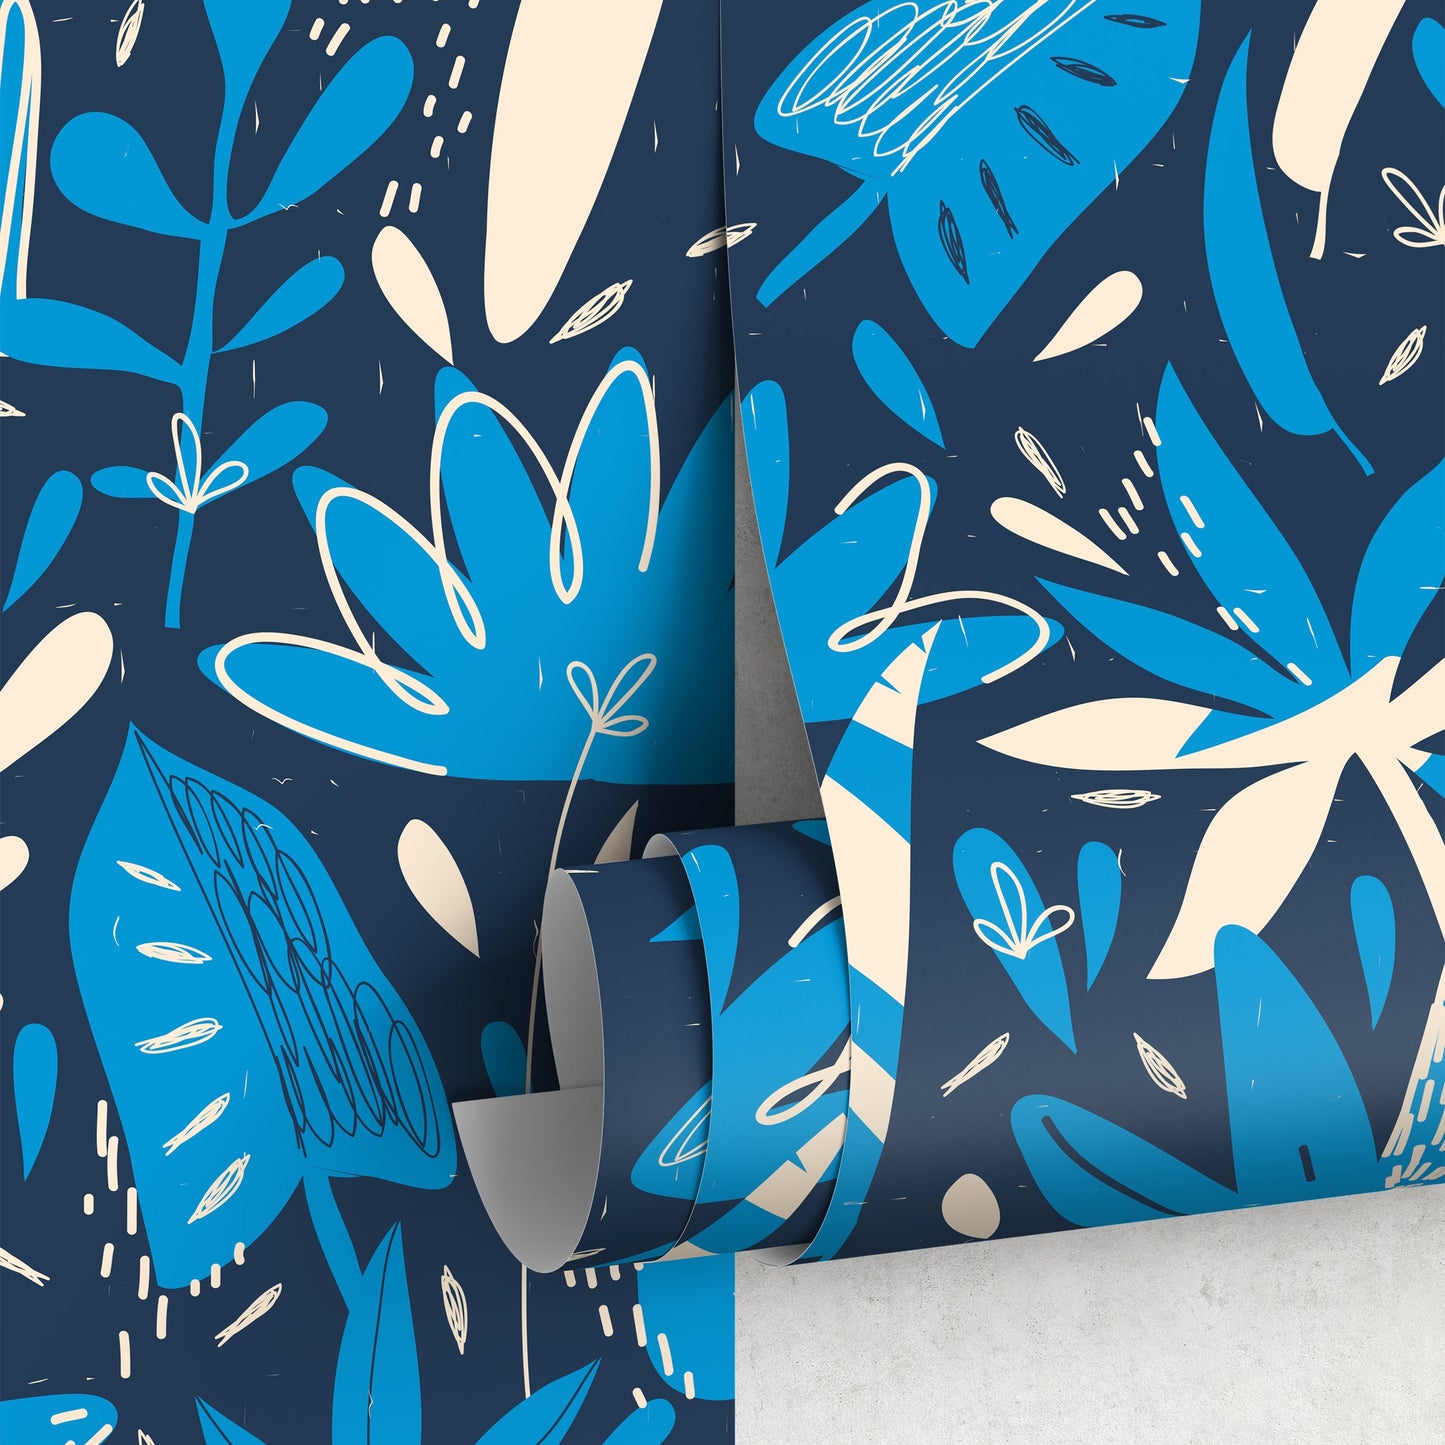 Wallpaper Peel and Stick Wallpaper Removable Wallpaper Home Decor Wall Art Wall Decor Room Decor / Blue Abstract Leaves Wallpaper - C372